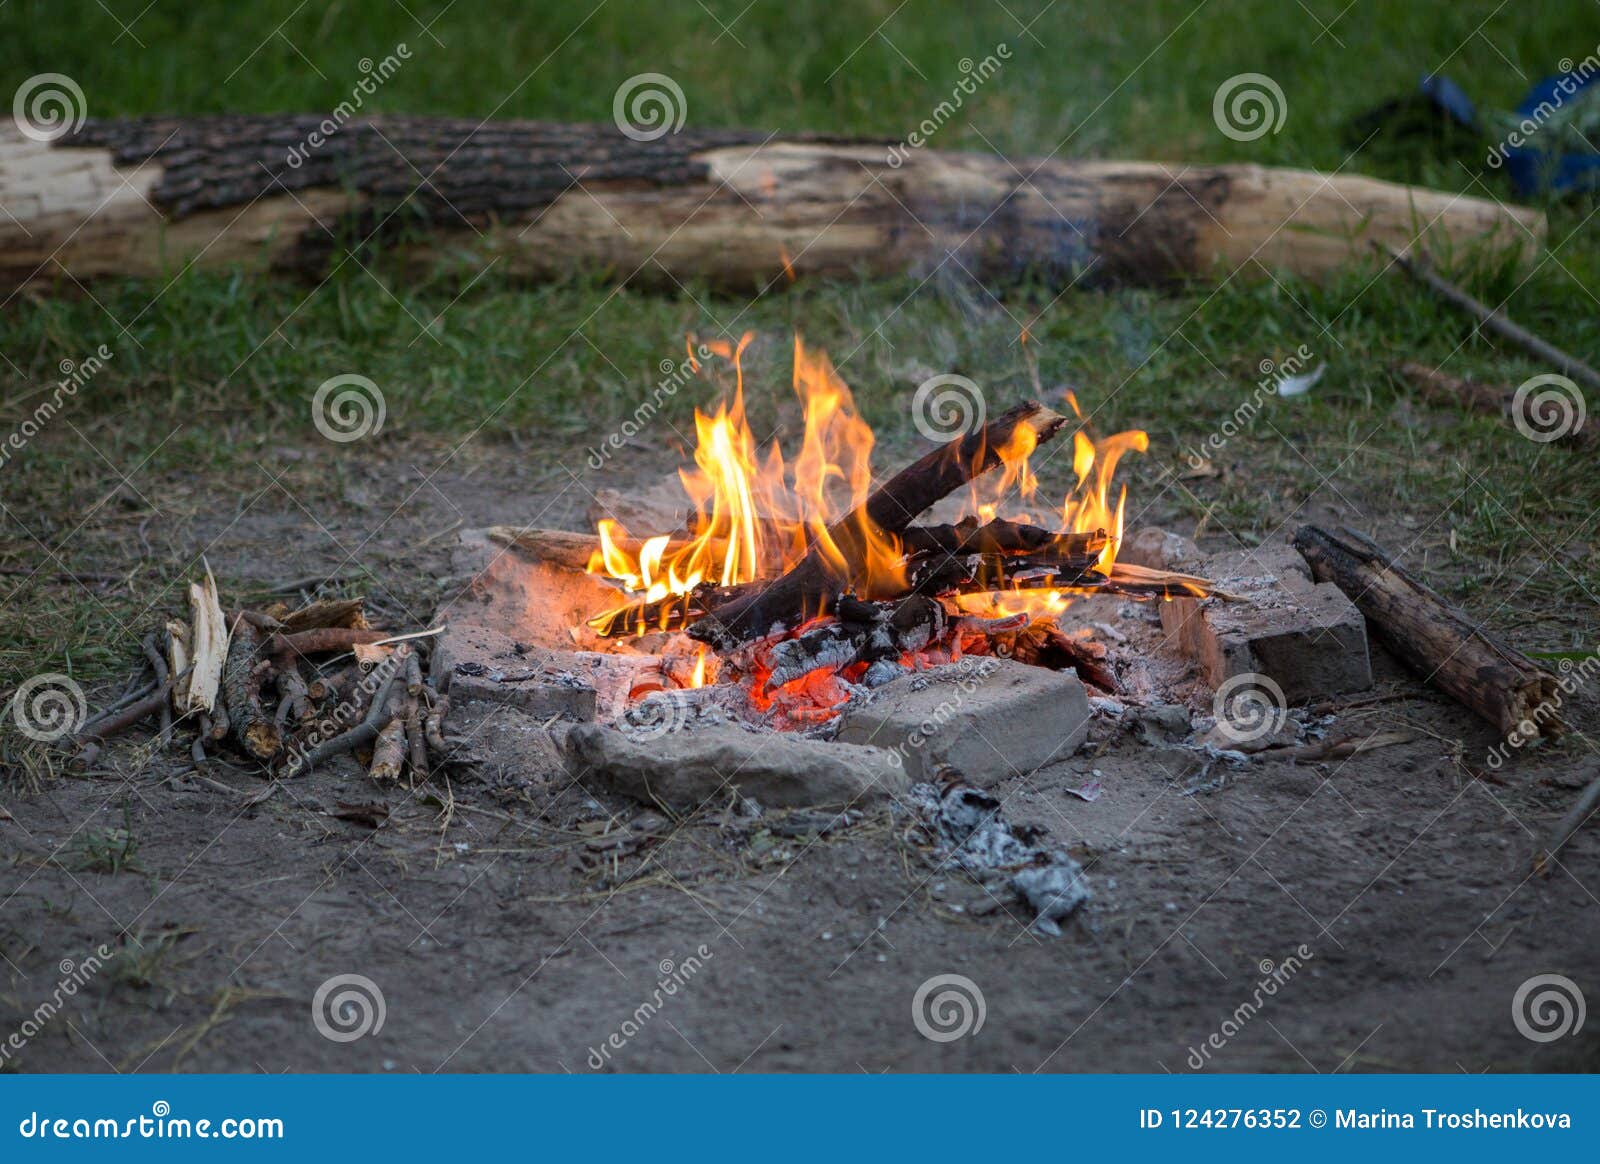 Photo of Campfire on Glade in Forest Stock Photo - Image of orange ...